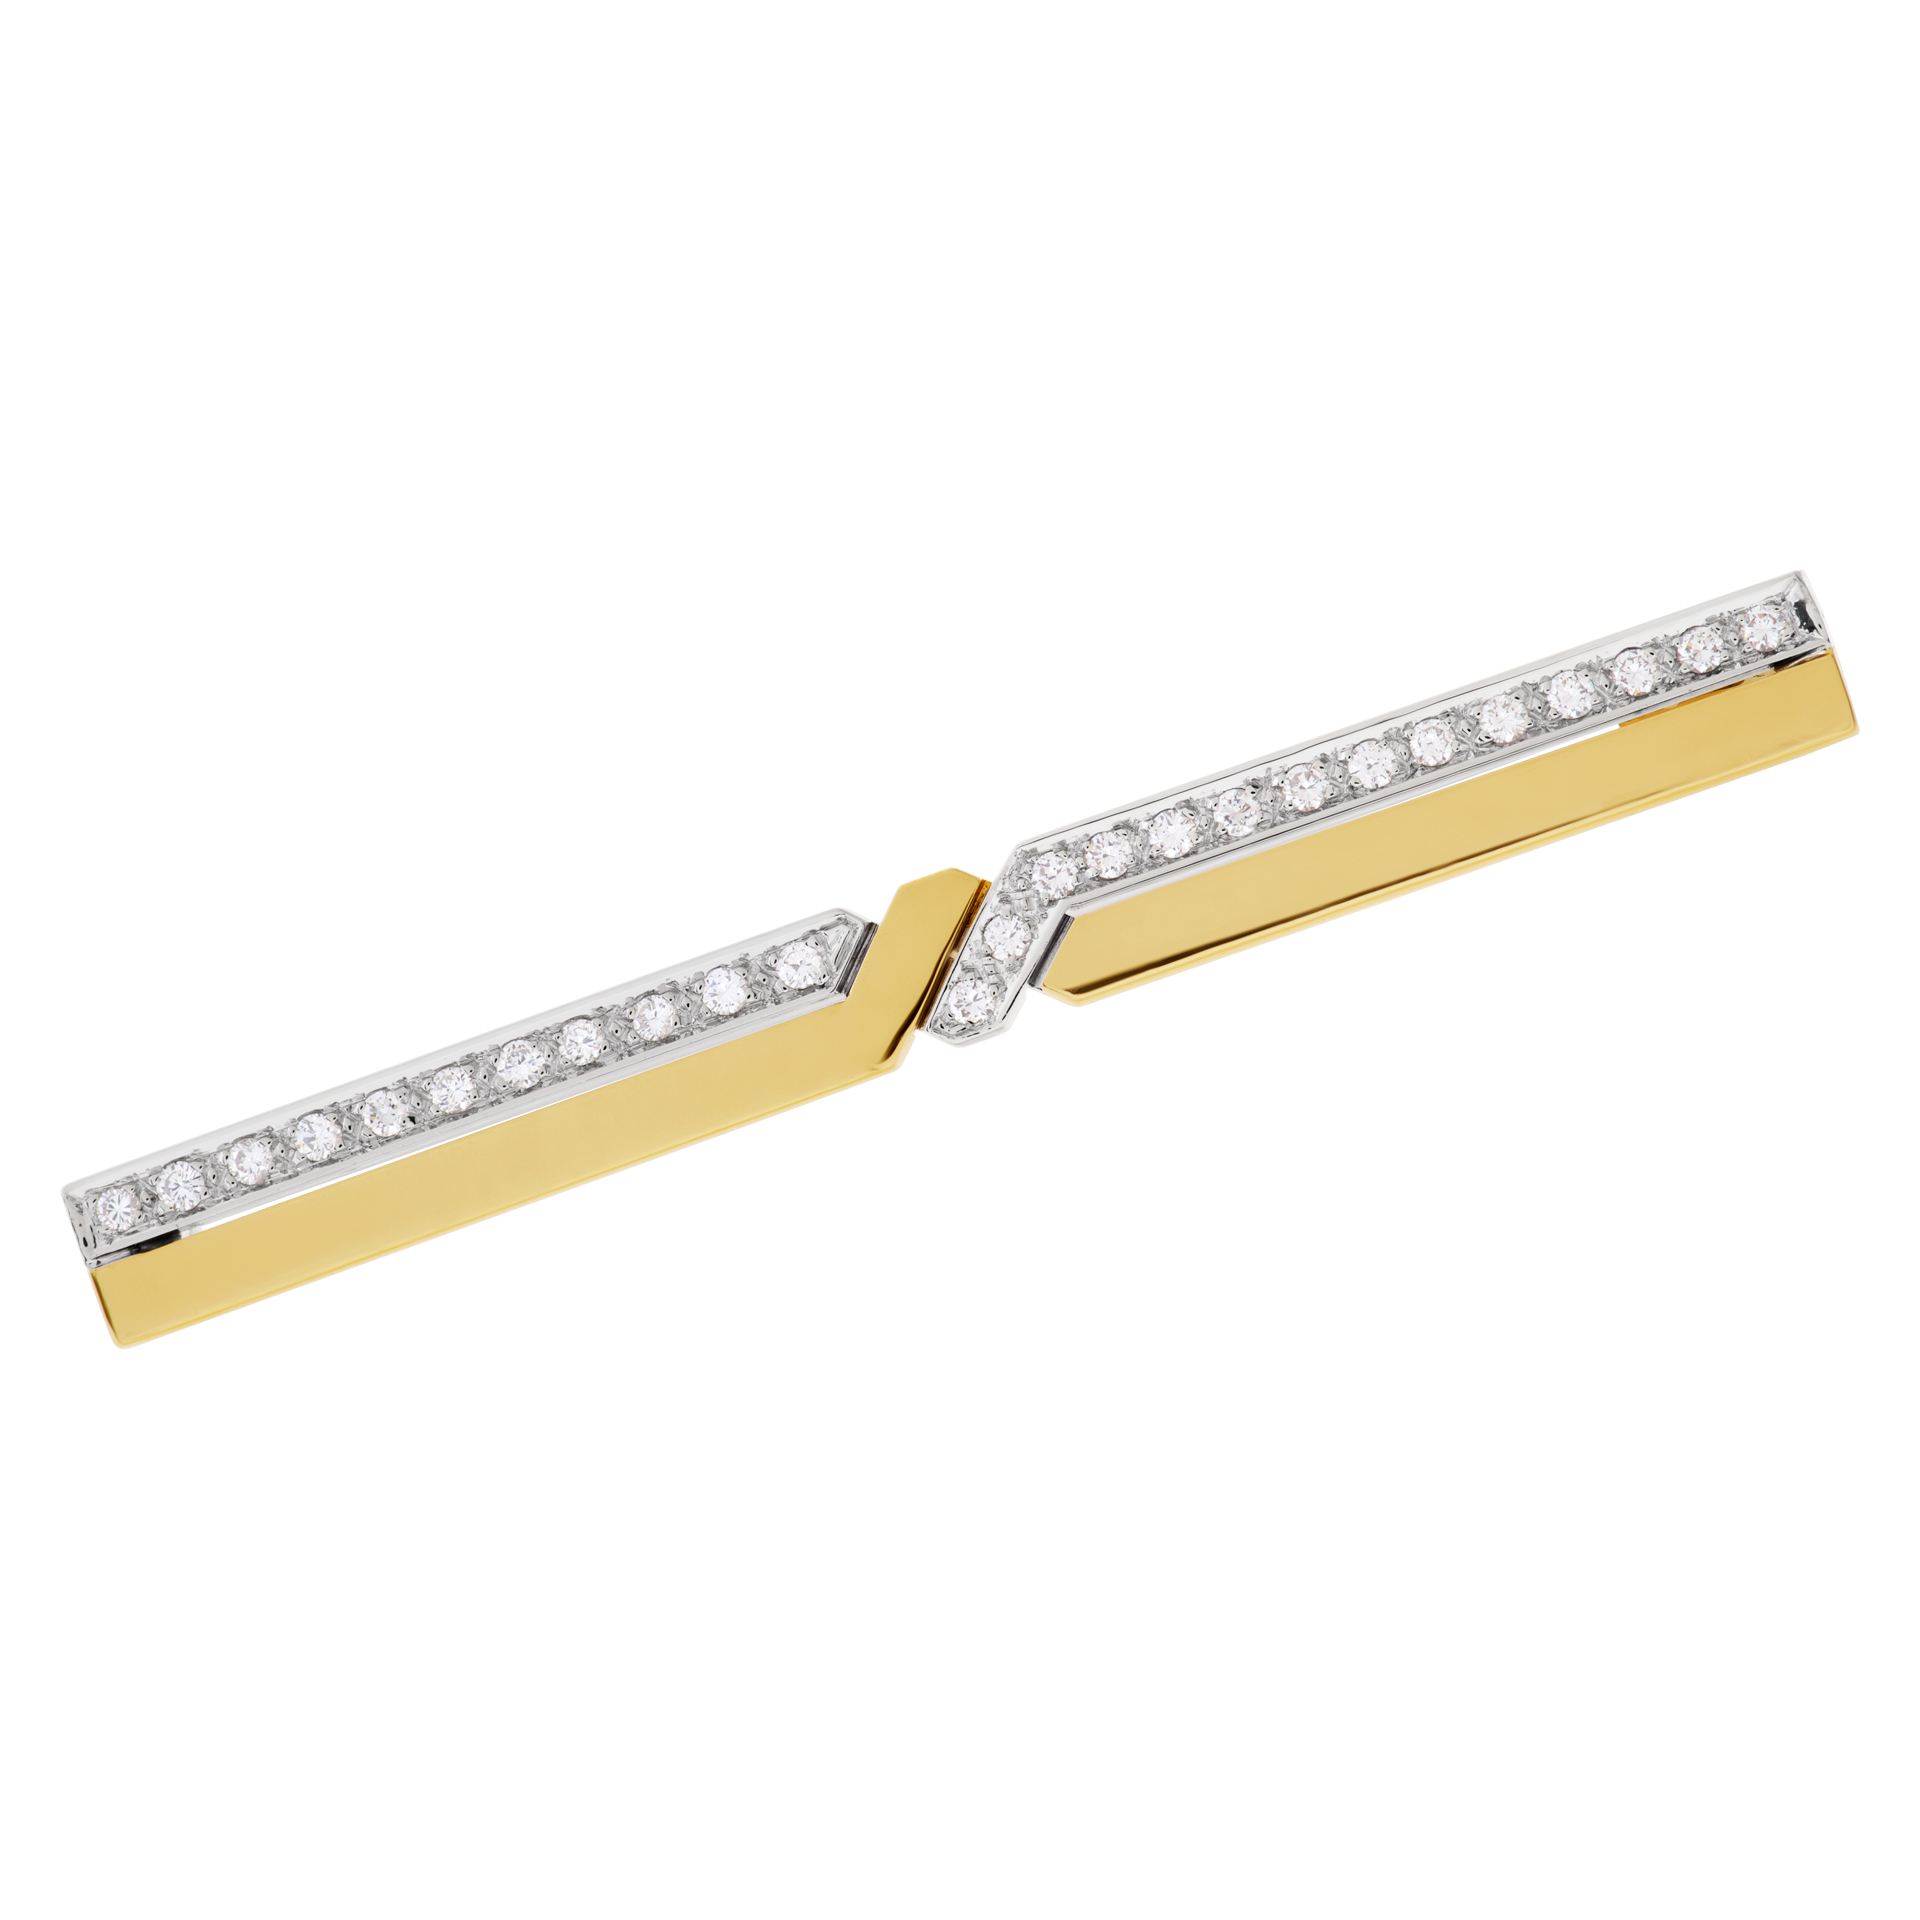 Pomelatto lightning bolt pin in 18k white & yellow gold with app 0.75 cts in diamonds